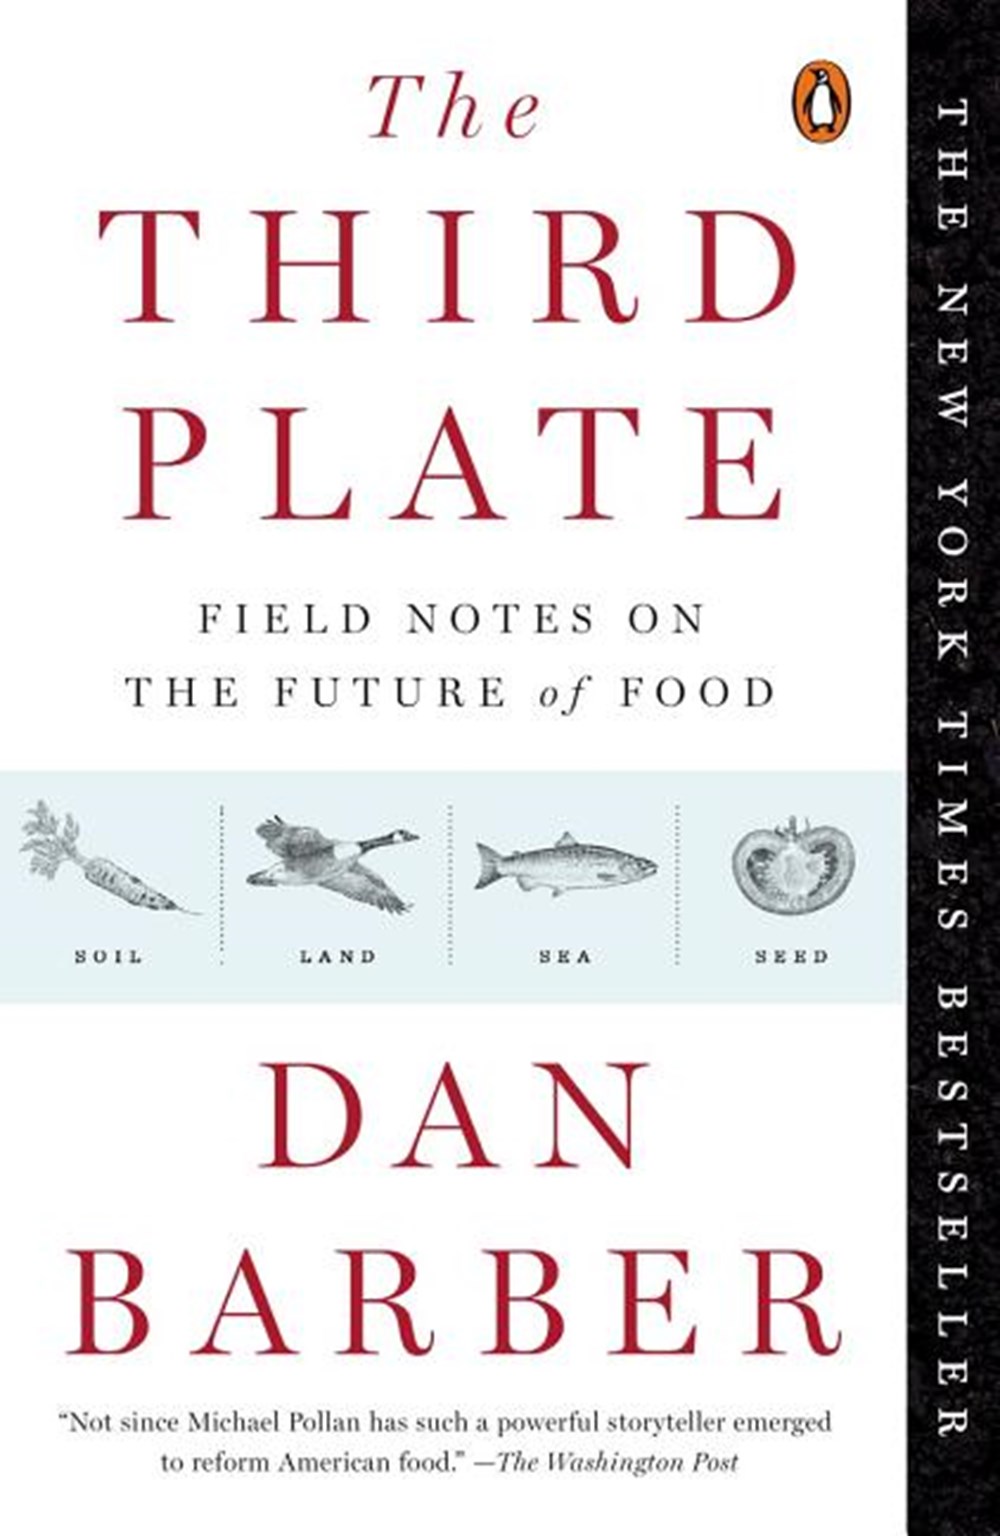 Third Plate: Field Notes on the Future of Food